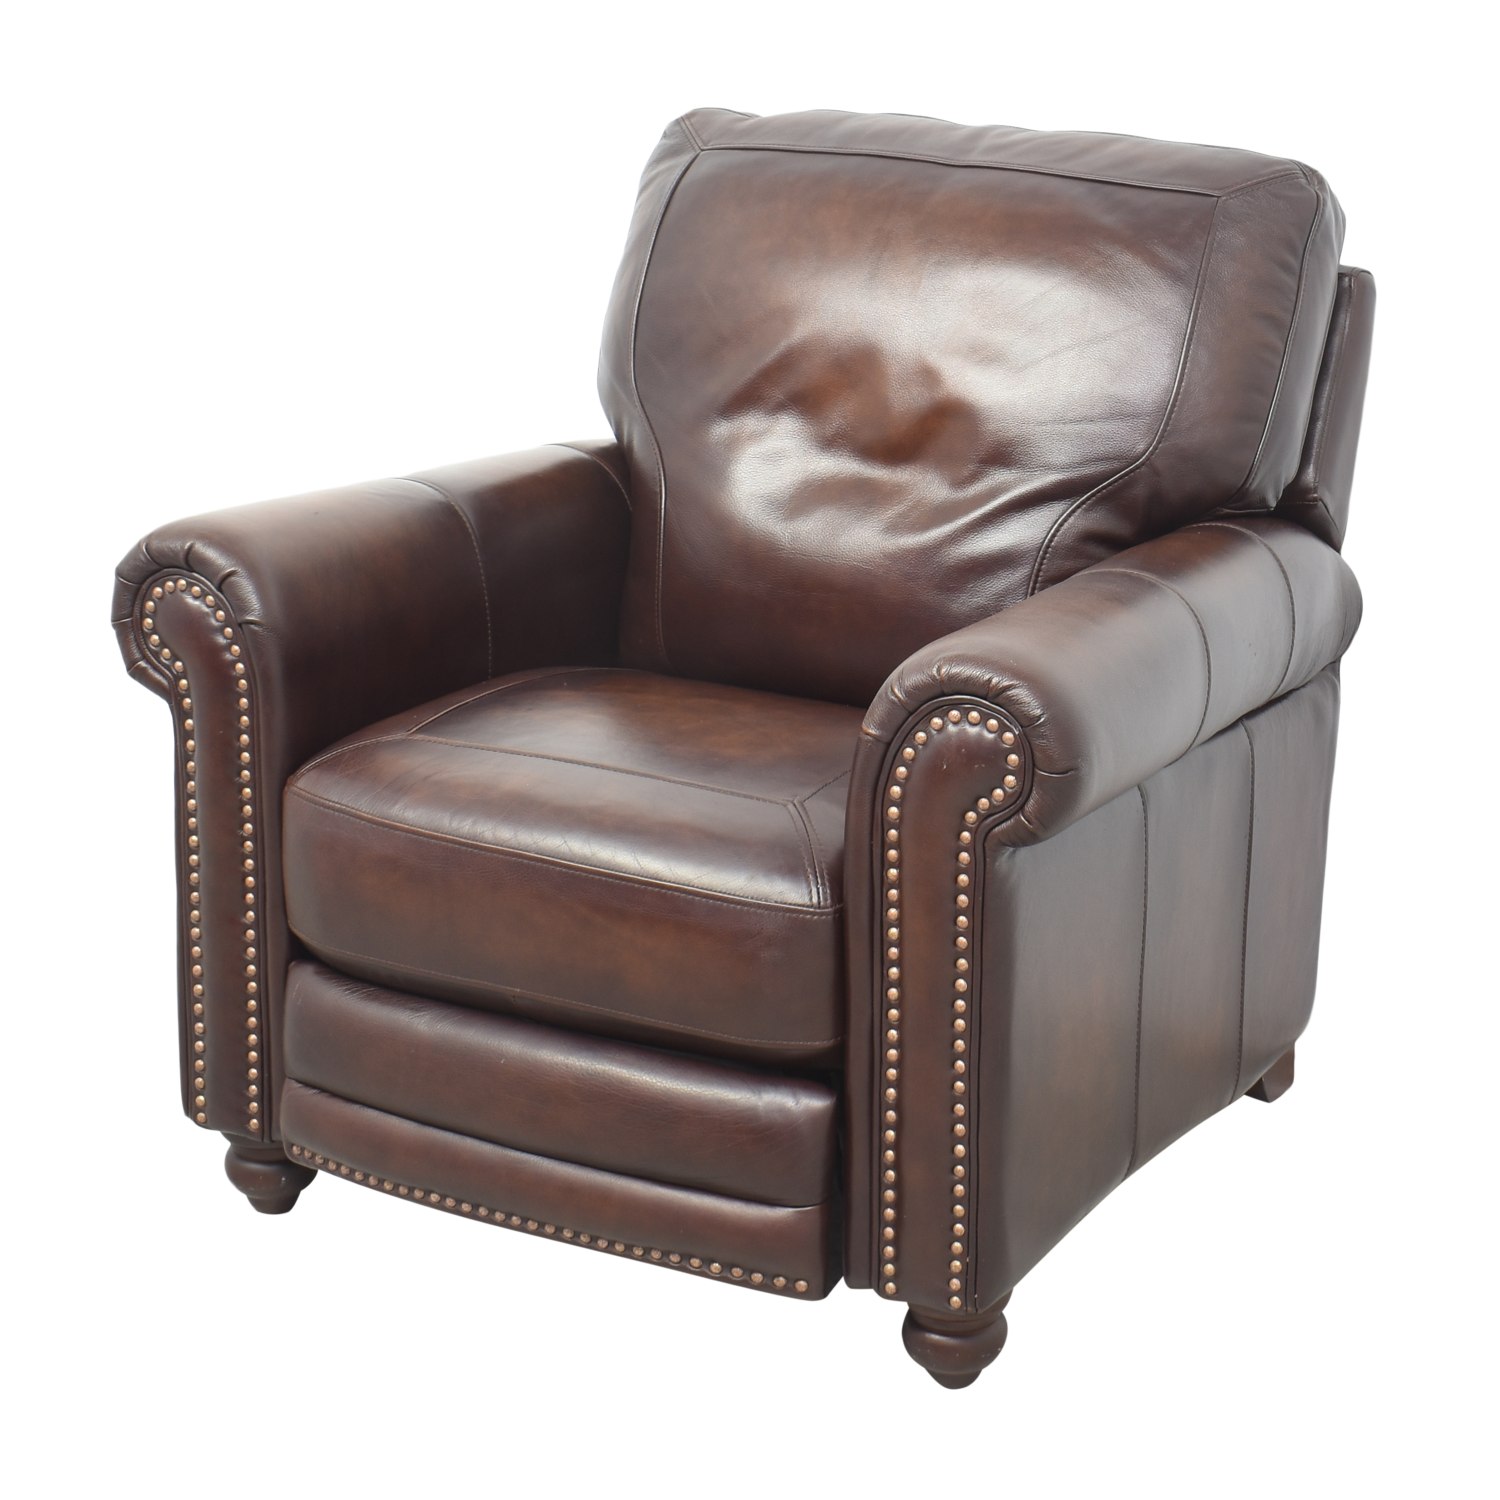 https://res.cloudinary.com/dkqtxtobb/image/upload/f_auto,q_auto:best,w_1500/product-assets/264416/bassett-furniture/chairs/recliners/buy-traditional-style-rolled-arm-recliner-chair.jpeg